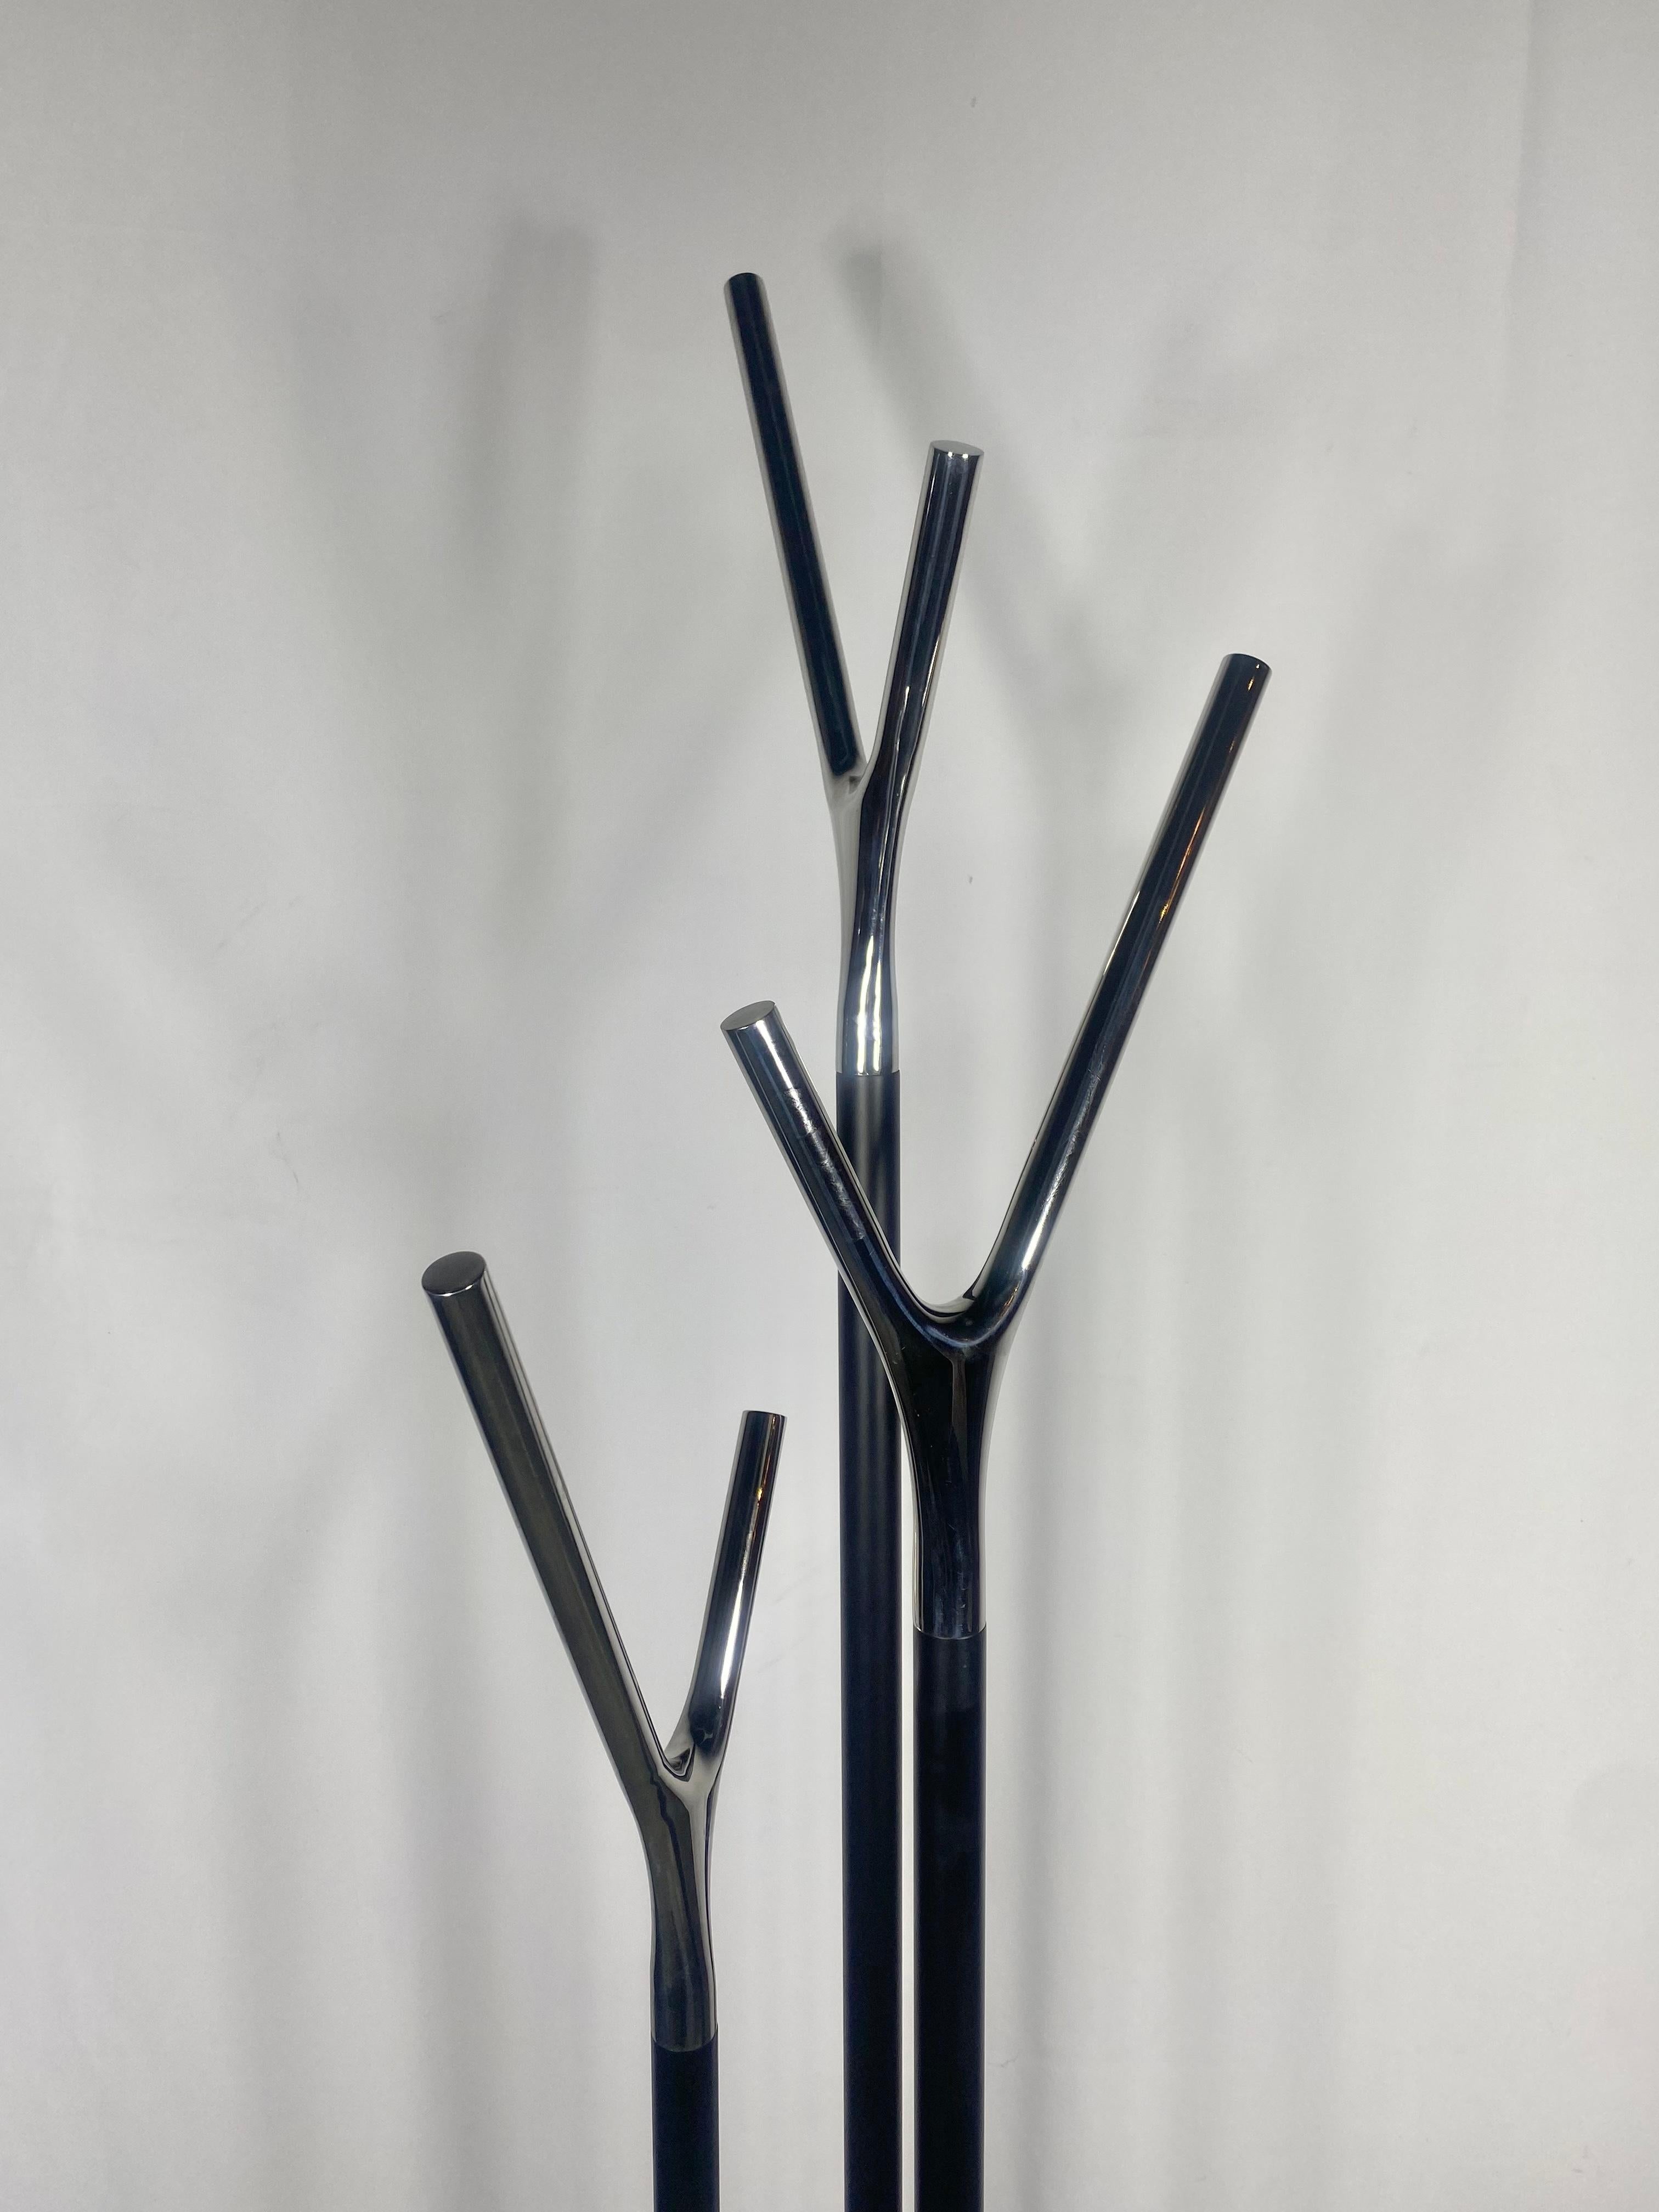 Modernist Contemporary Wishbone Coat Stand - Mirror Chrome by Busk+Hertzog For Sale 1